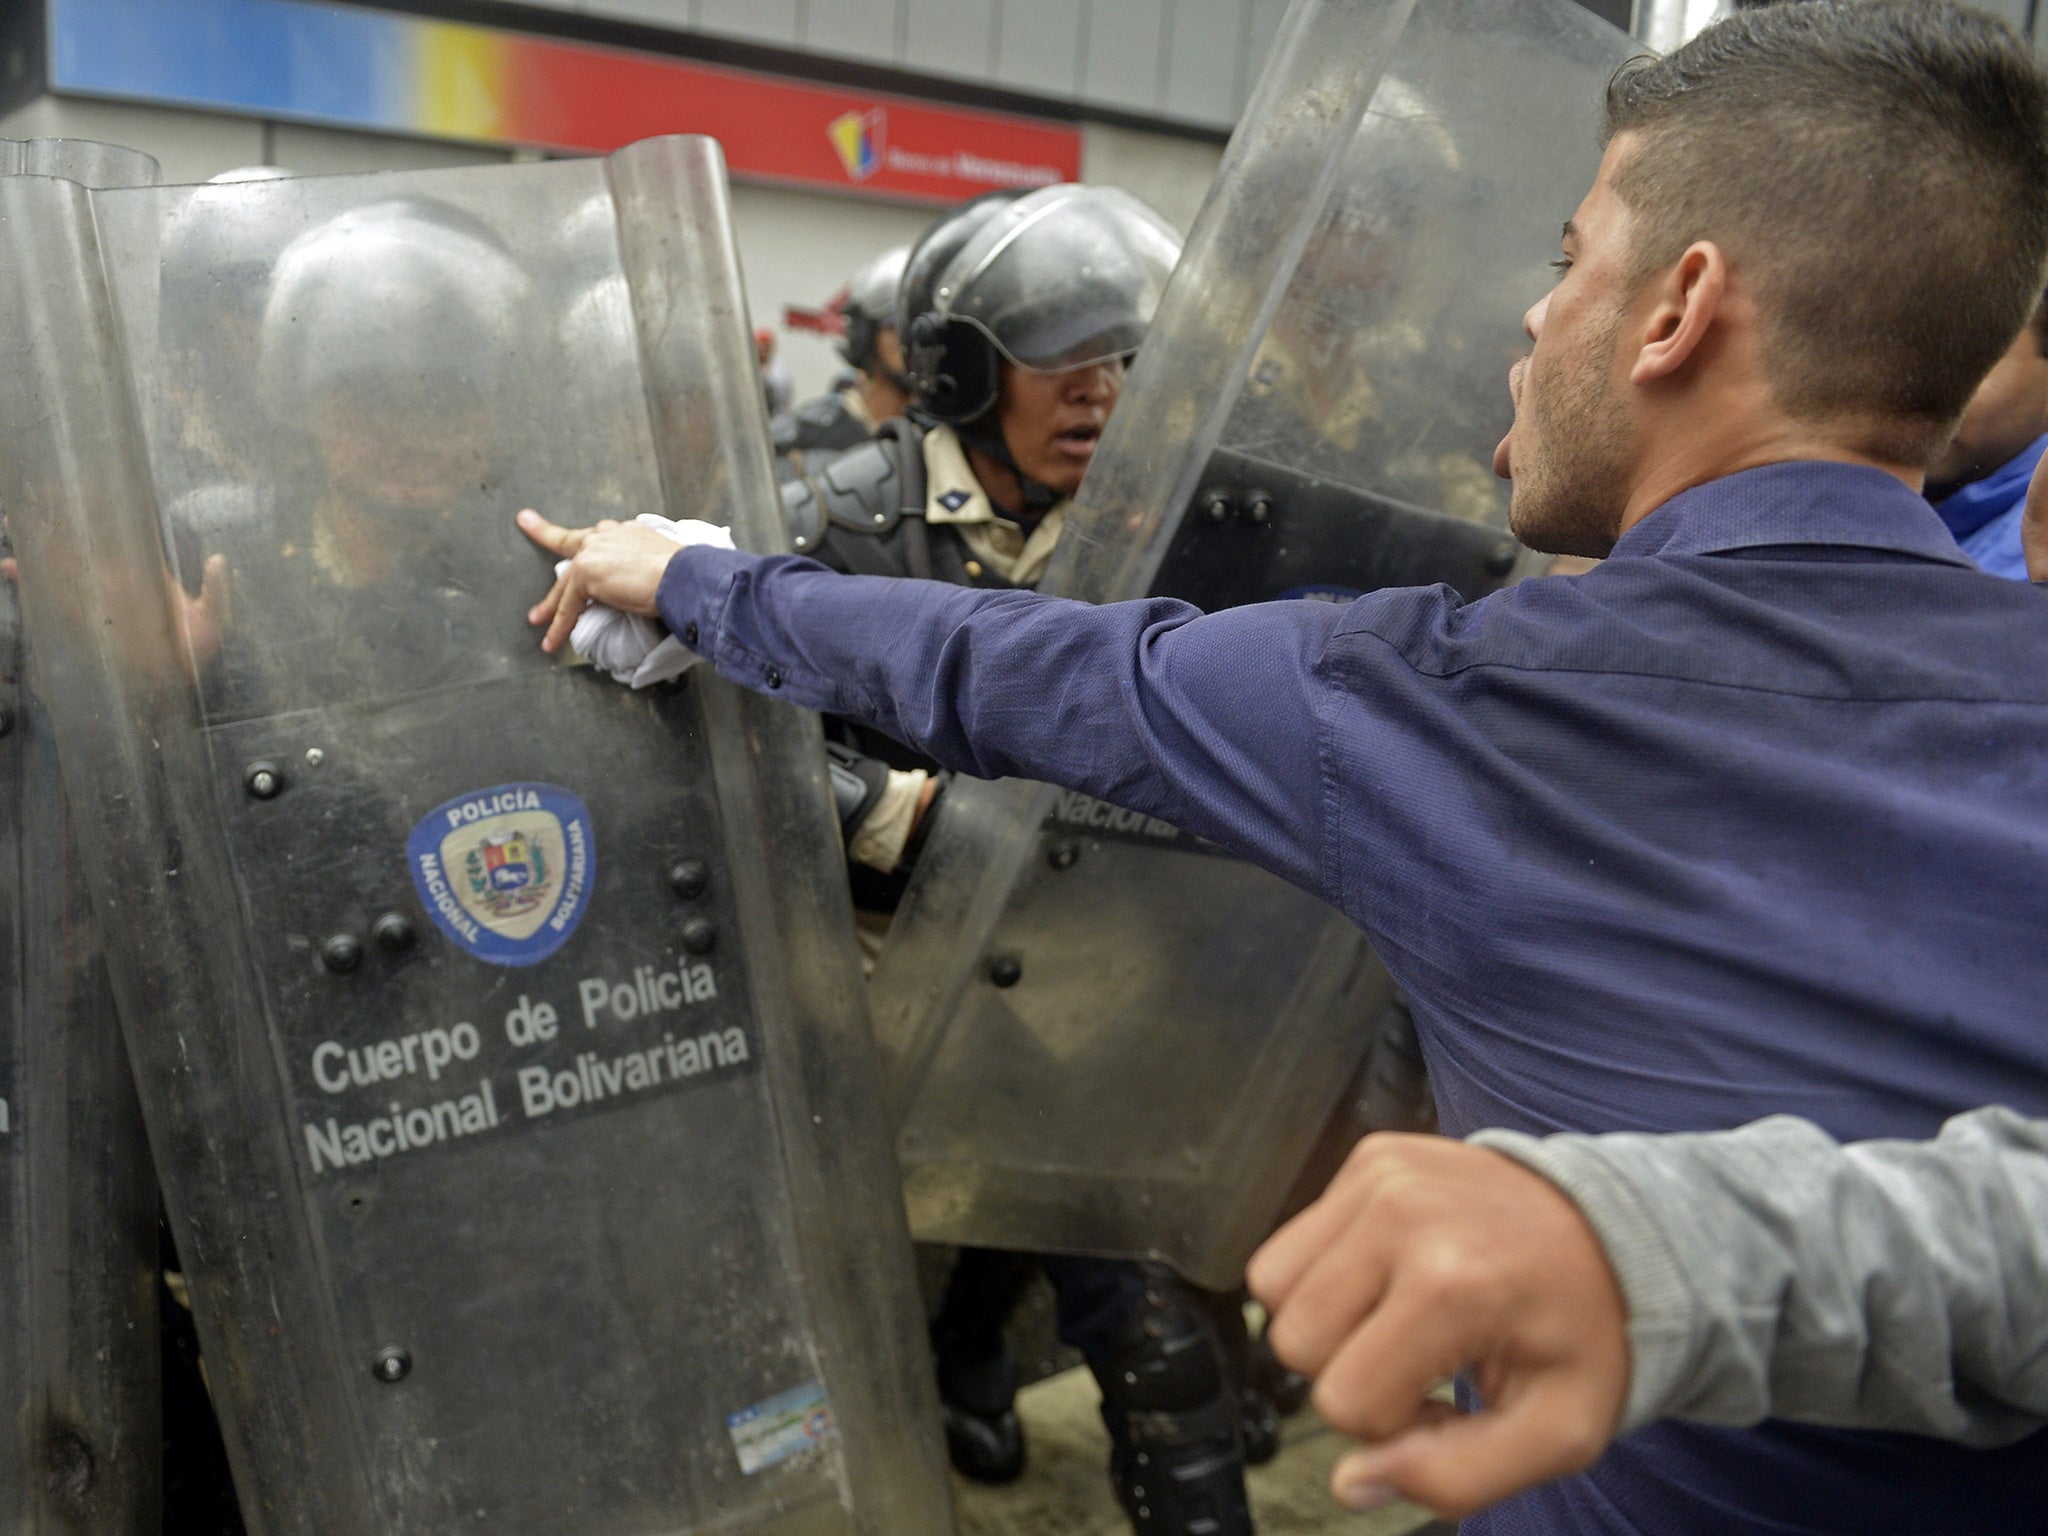 In Venezuela political oppression is rife, with rumours of an imminent coup